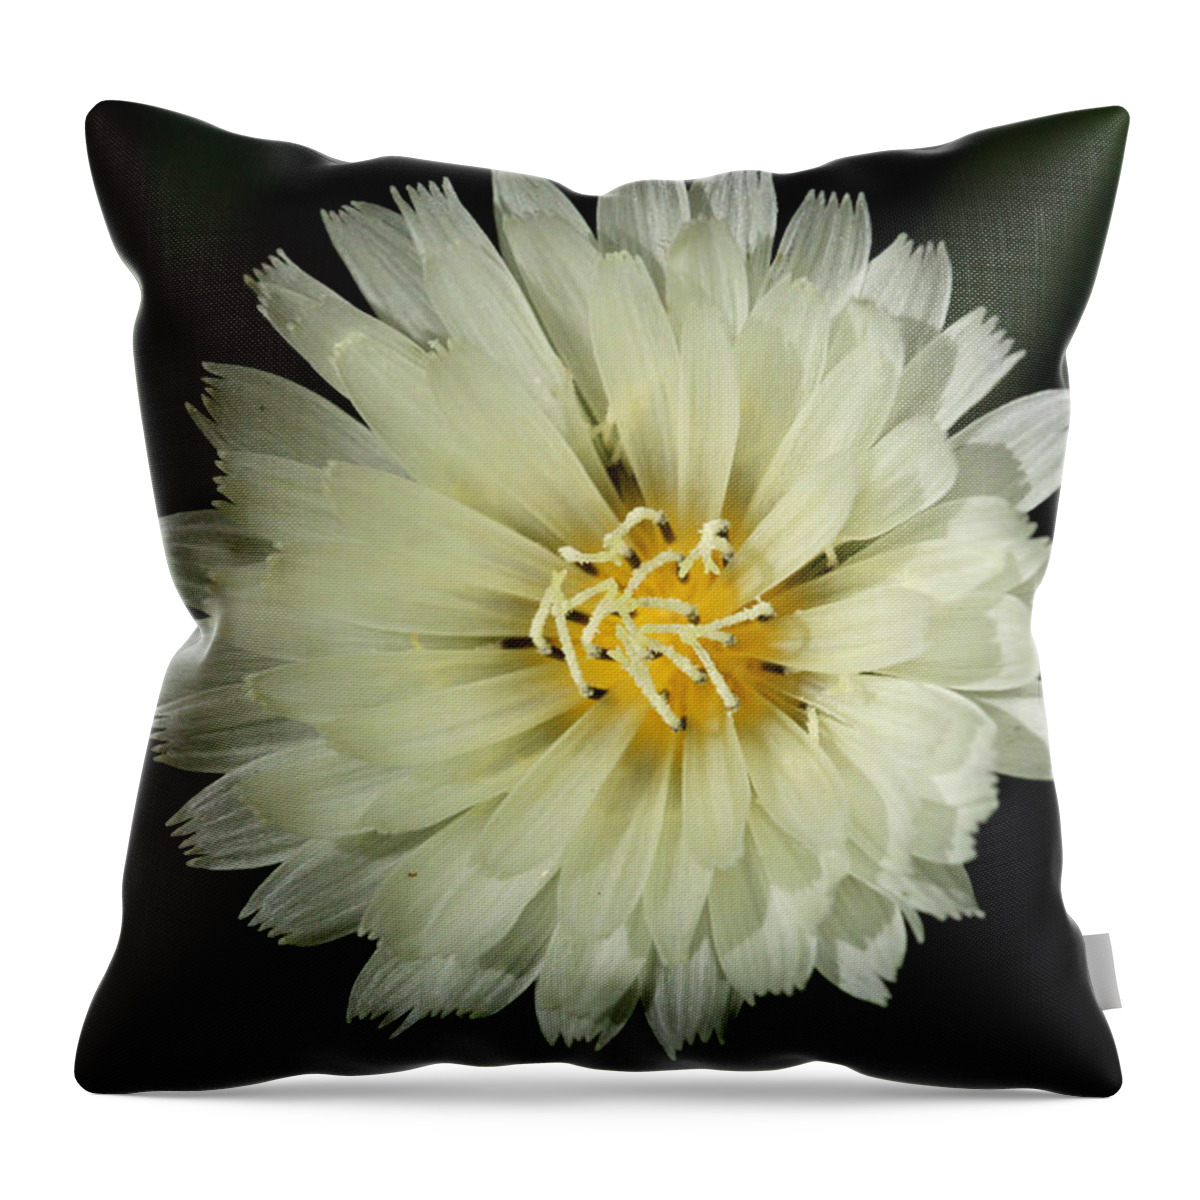 Flower Throw Pillow featuring the photograph Radiance by April Wietrecki Green